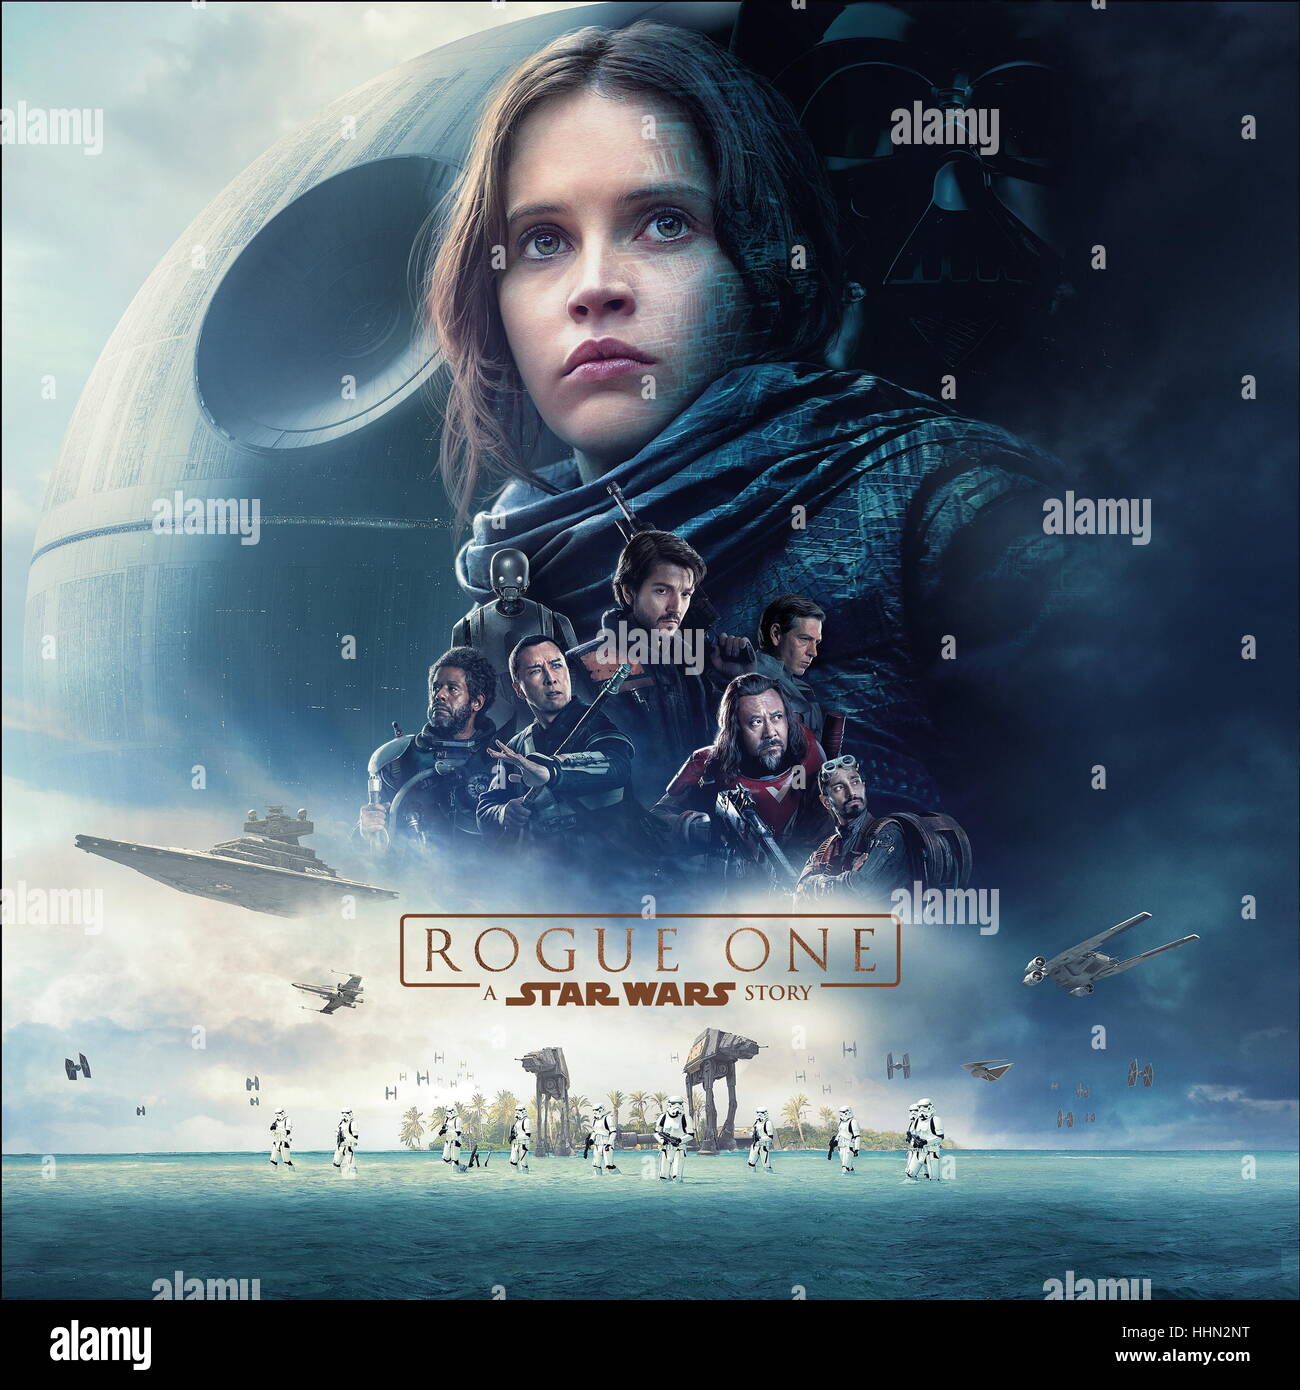 RELEASE DATE: December 16, 2016 TITLE: Rogue One aka A Star Wars Story  STUDIO: Lucasfilm DIRECTOR: Gareth Edwards PLOT: Rebels set out on a  mission to steal the plans for the Death